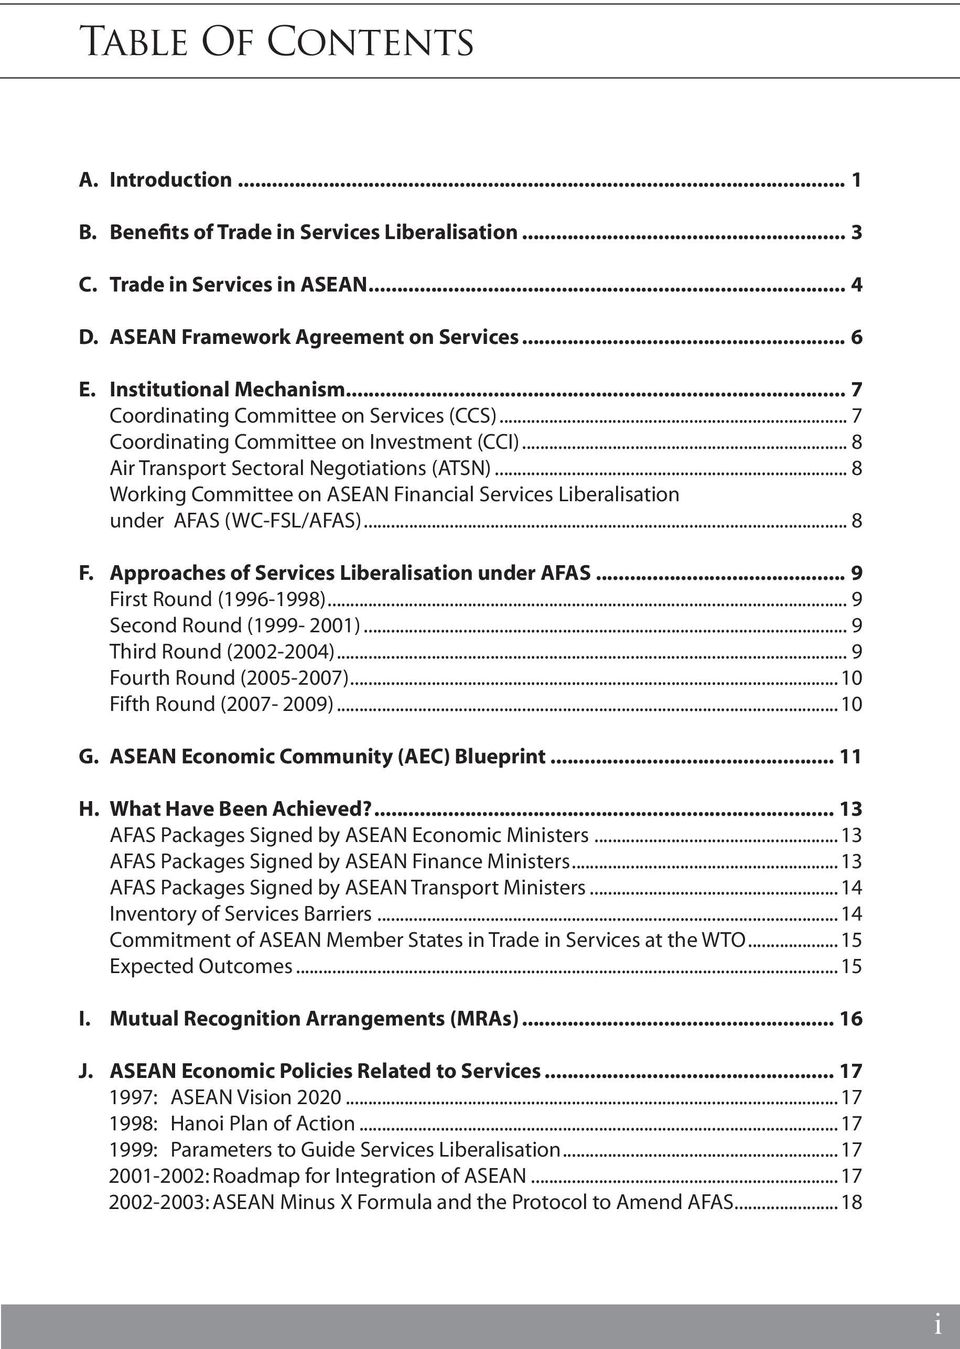 .. 8 Working Committee on ASEAN Financial Services Liberalisation under AFAS (WC-FSL/AFAS)... 8 F. Approaches of Services Liberalisation under AFAS... 9 First Round (1996-1998).